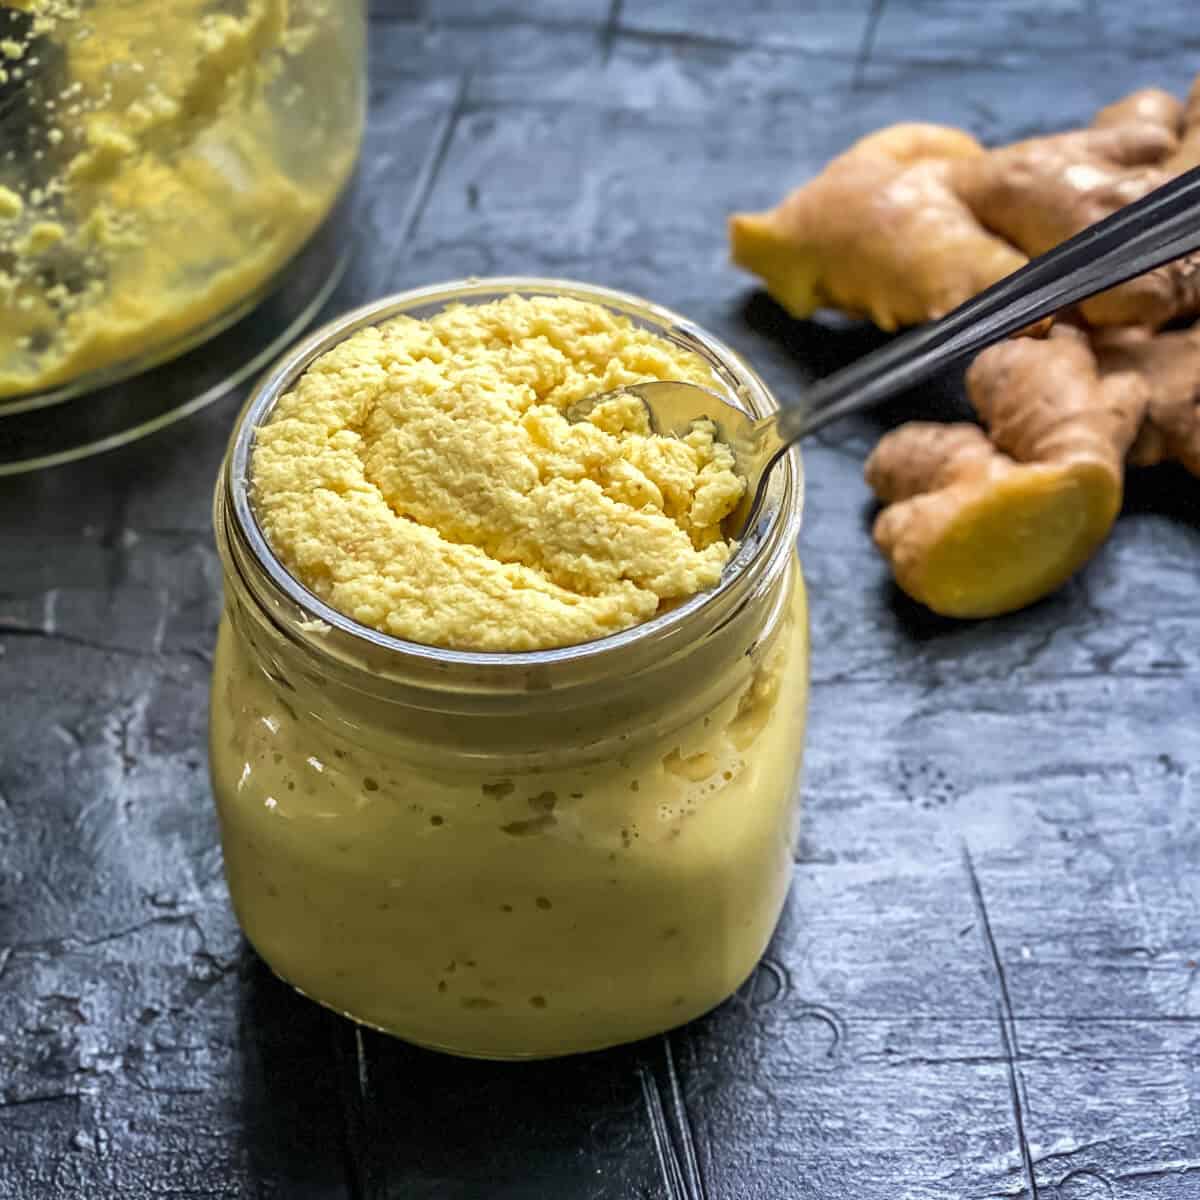 A jar of ginger paste with a spoon in it.